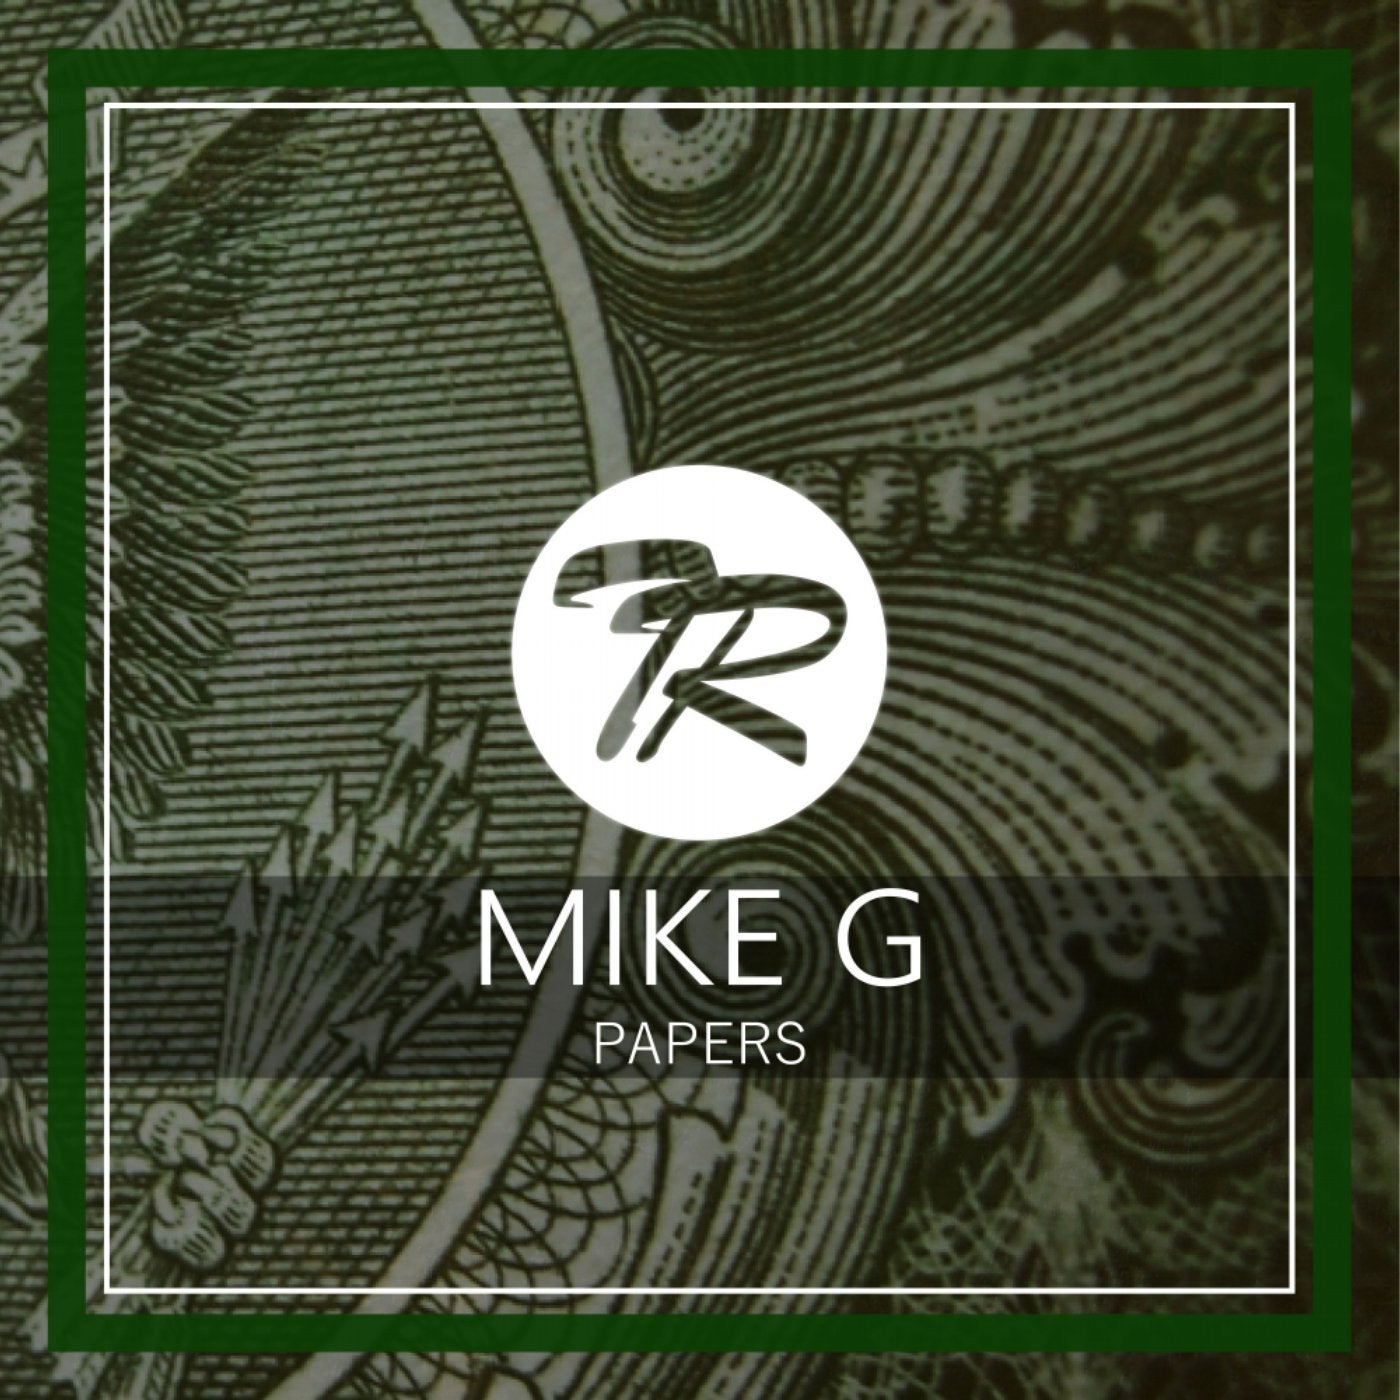 G papers. Mike g. Goodfella Mike g.